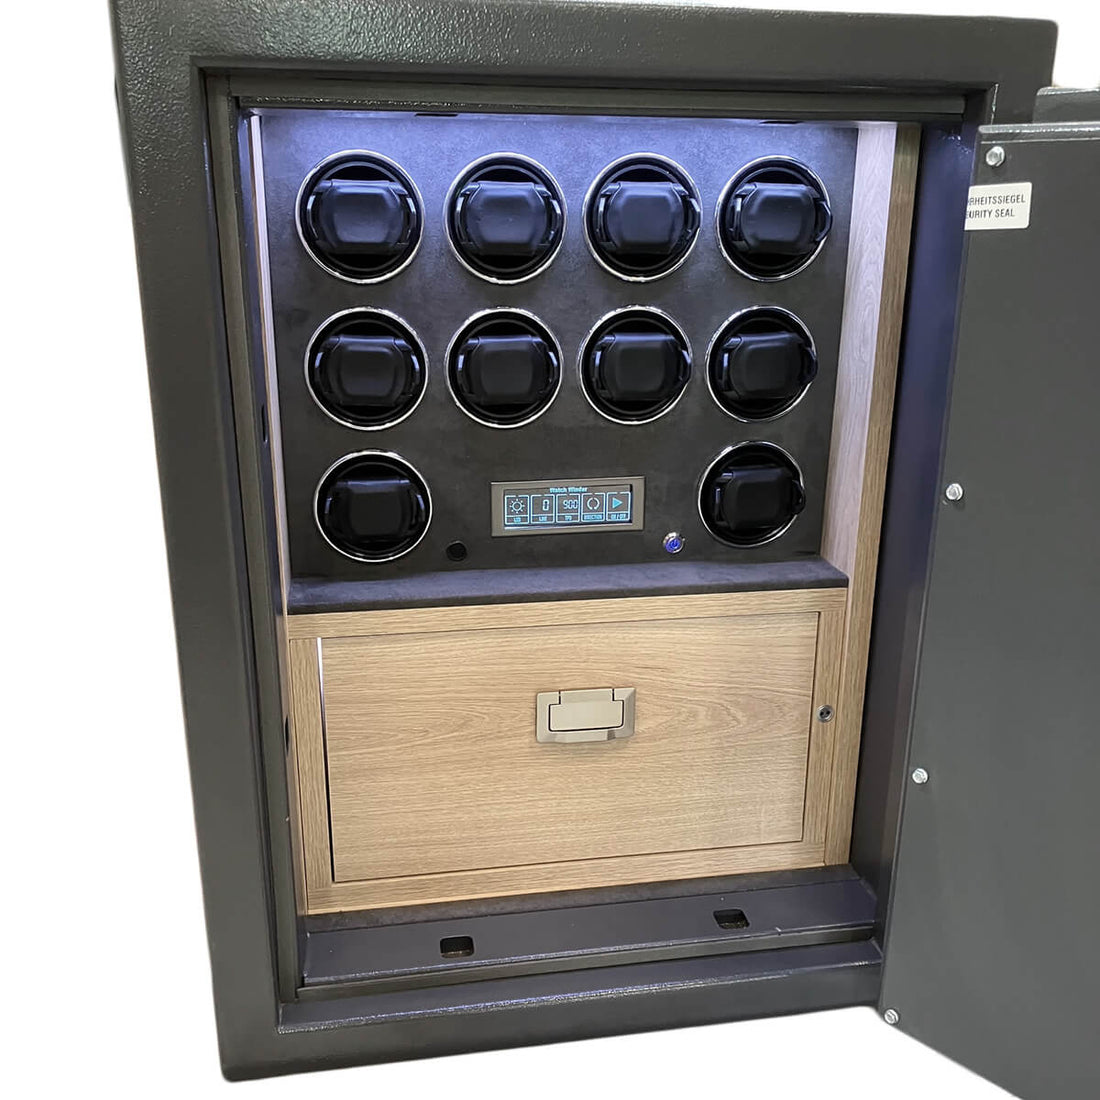 Choosing the Perfect Watch Winder: A Timeless Investment